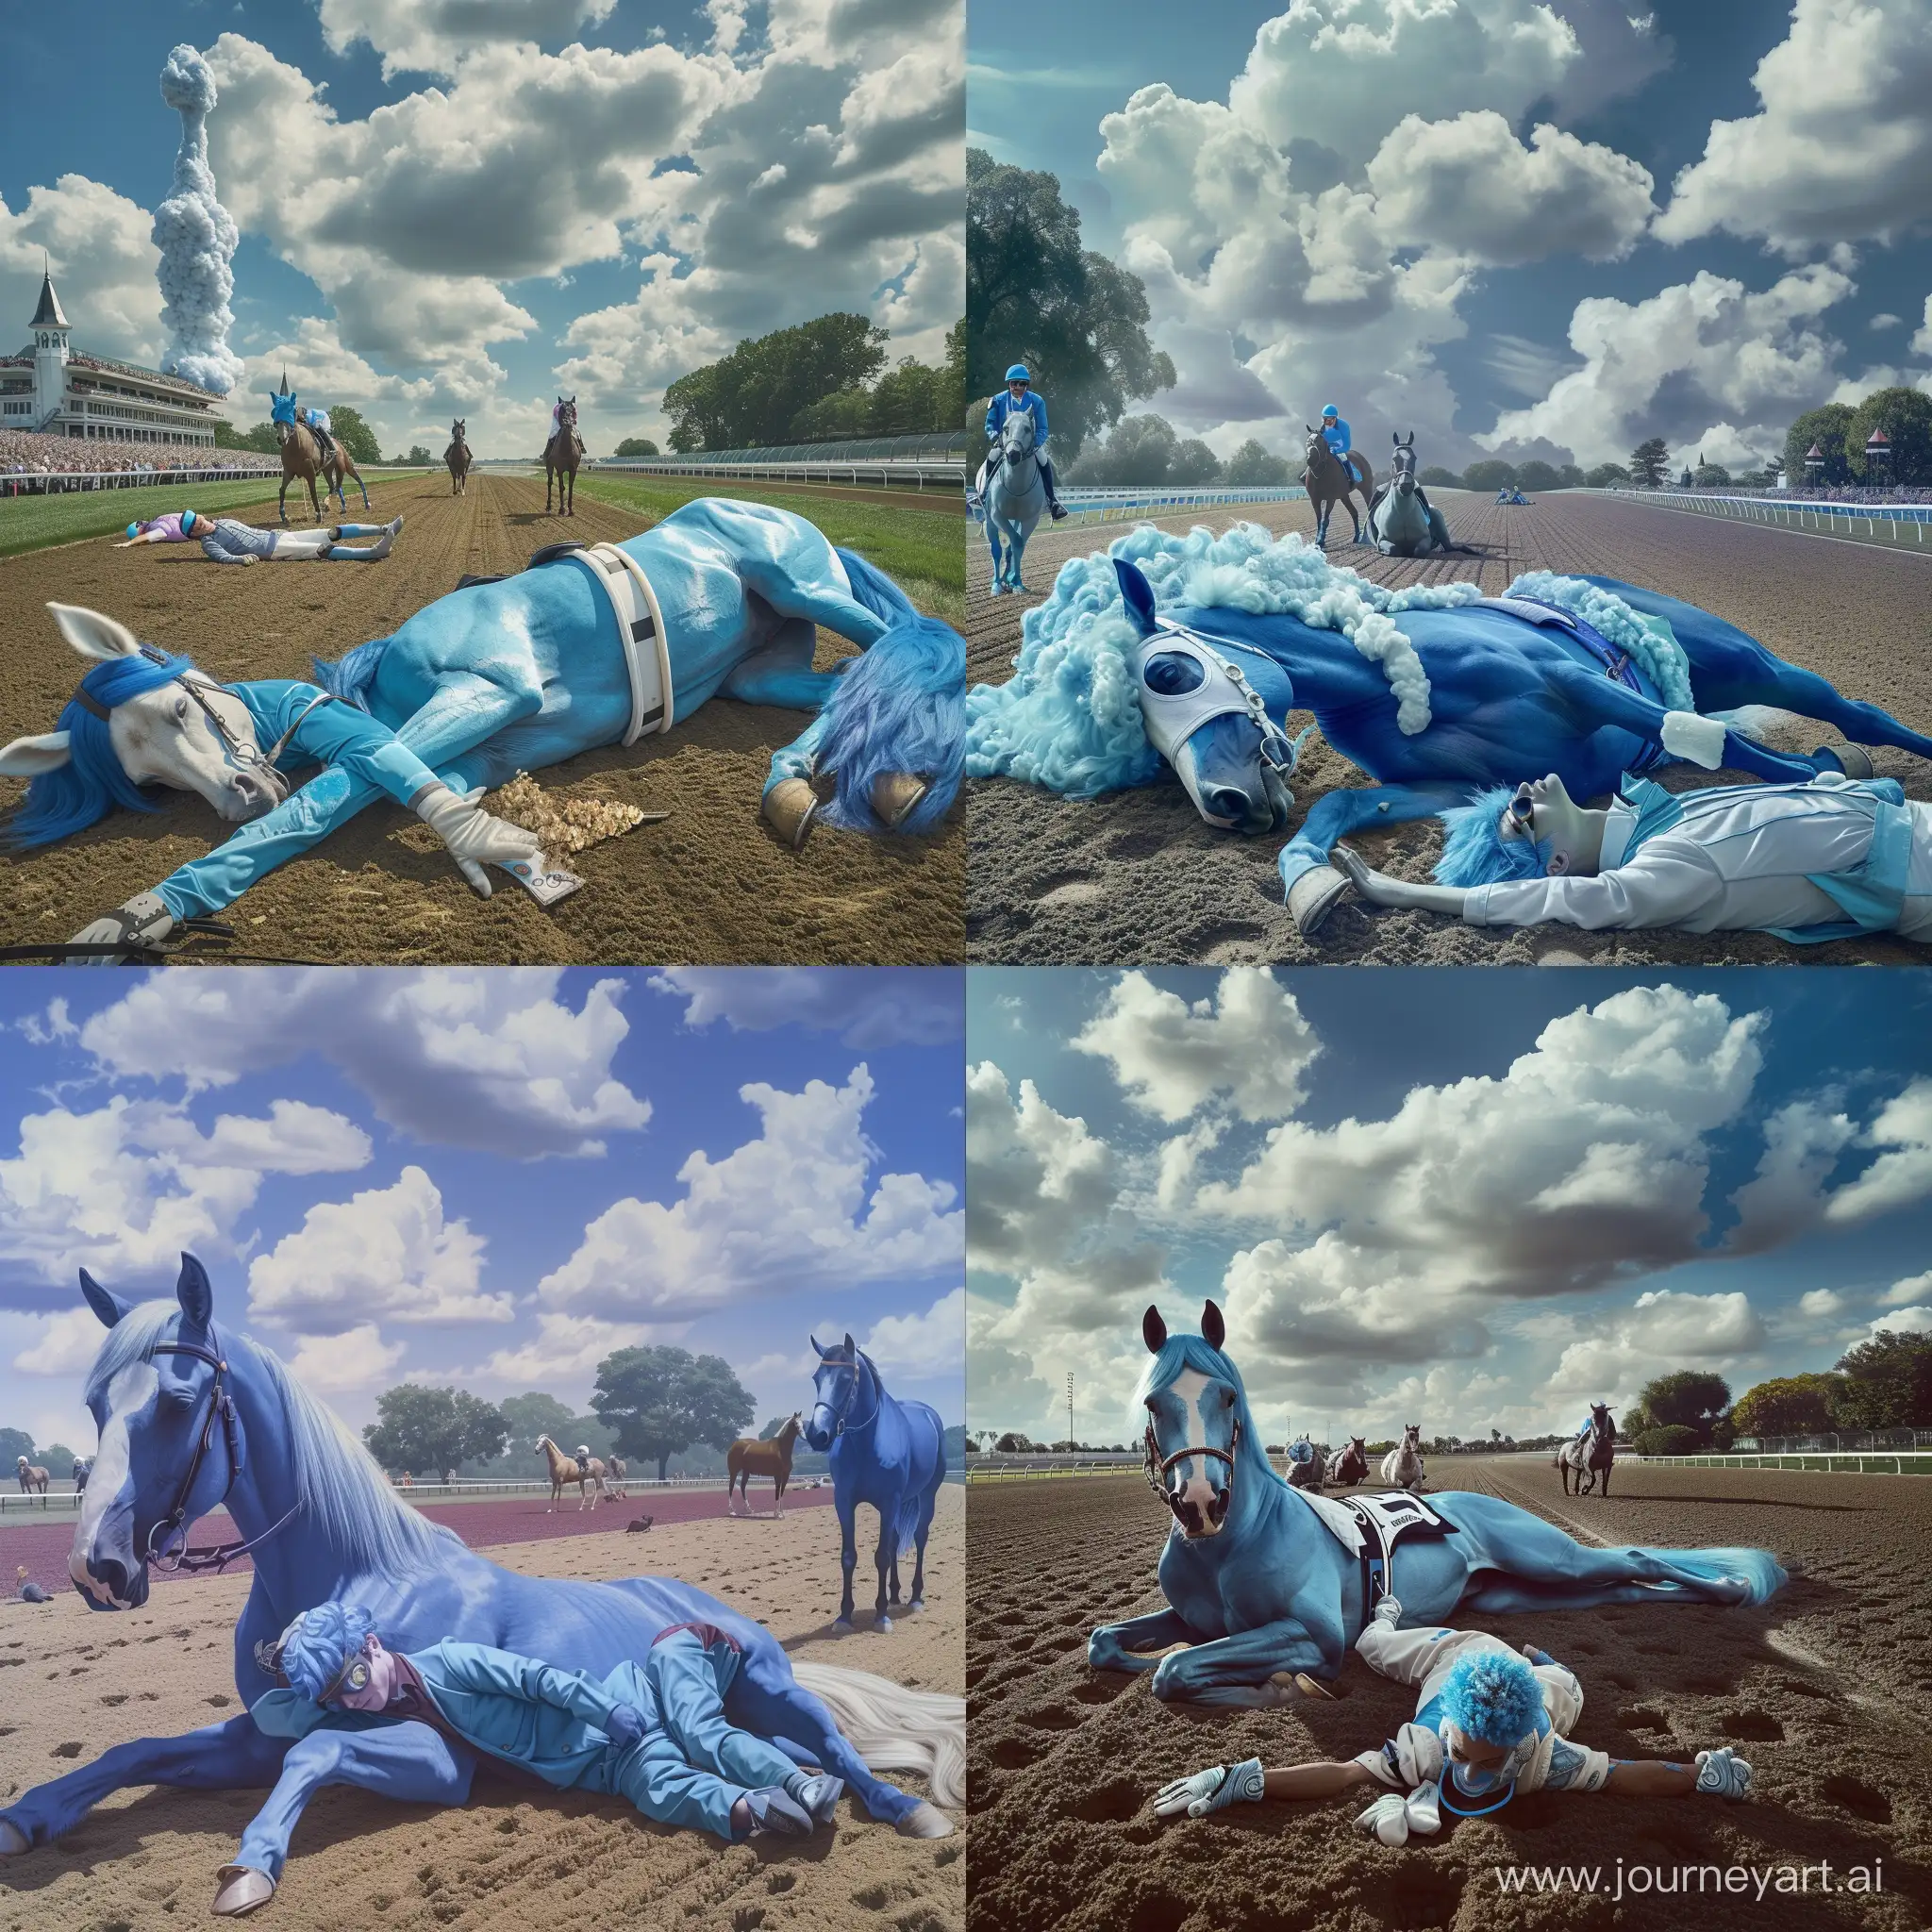 deep blue horse with white face, white ears, pale blue mane and tale lying down on race track, blue haired 37 year old horse rider, rider lying on the ground in front of horse, race track, other horses, fluffy clouds, trees